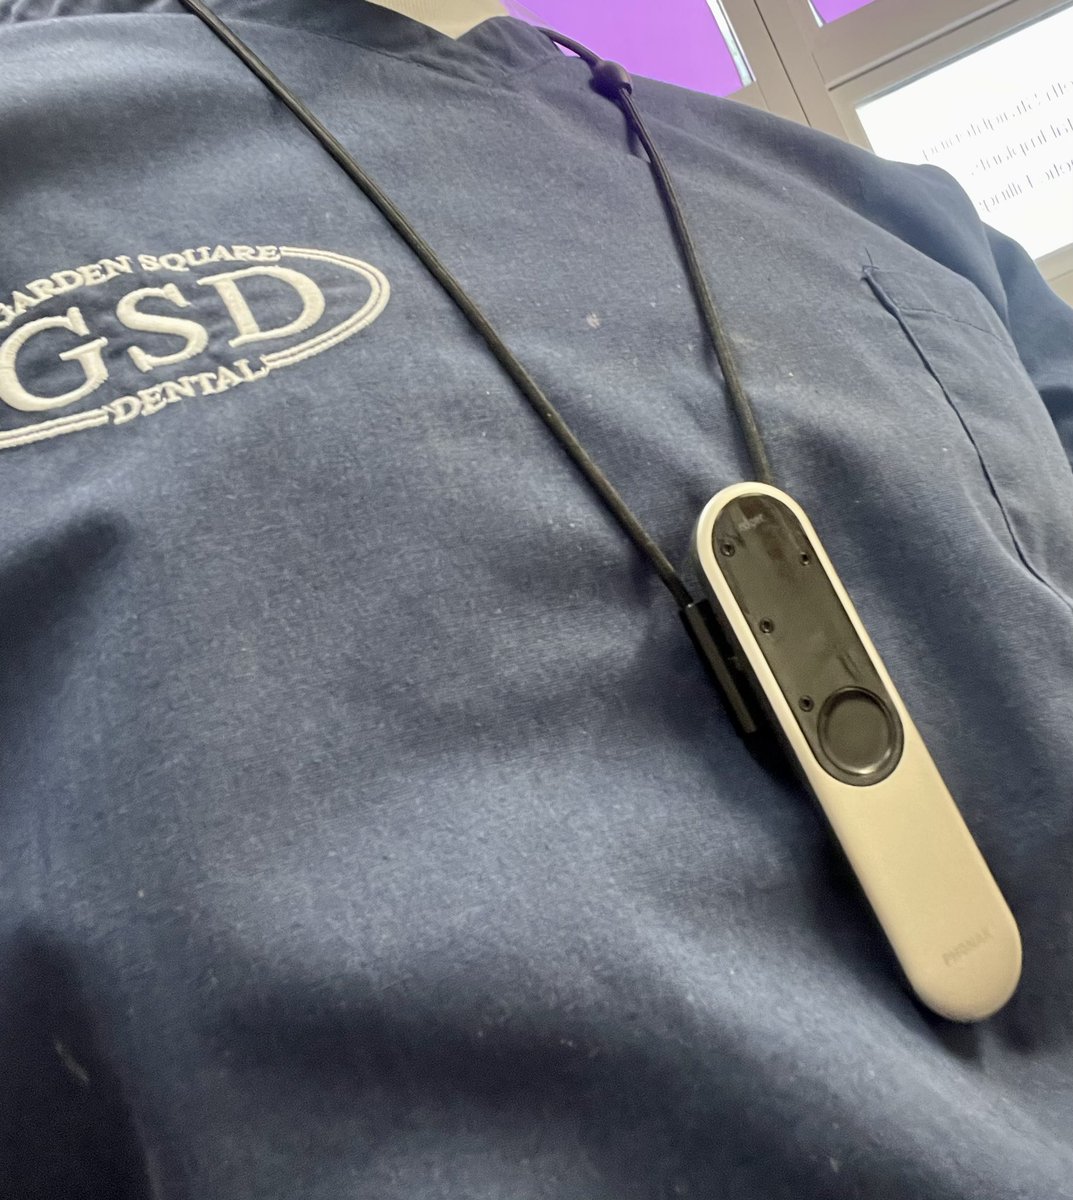 Was asked to wear this by an elderly patient of ours- apparently it amplified my voice into her hearing aid making it much easier to communicate. Worked well! Impressive piece of kit👀🤩#communication #deaf #deafness #hearingaids #hearingaid